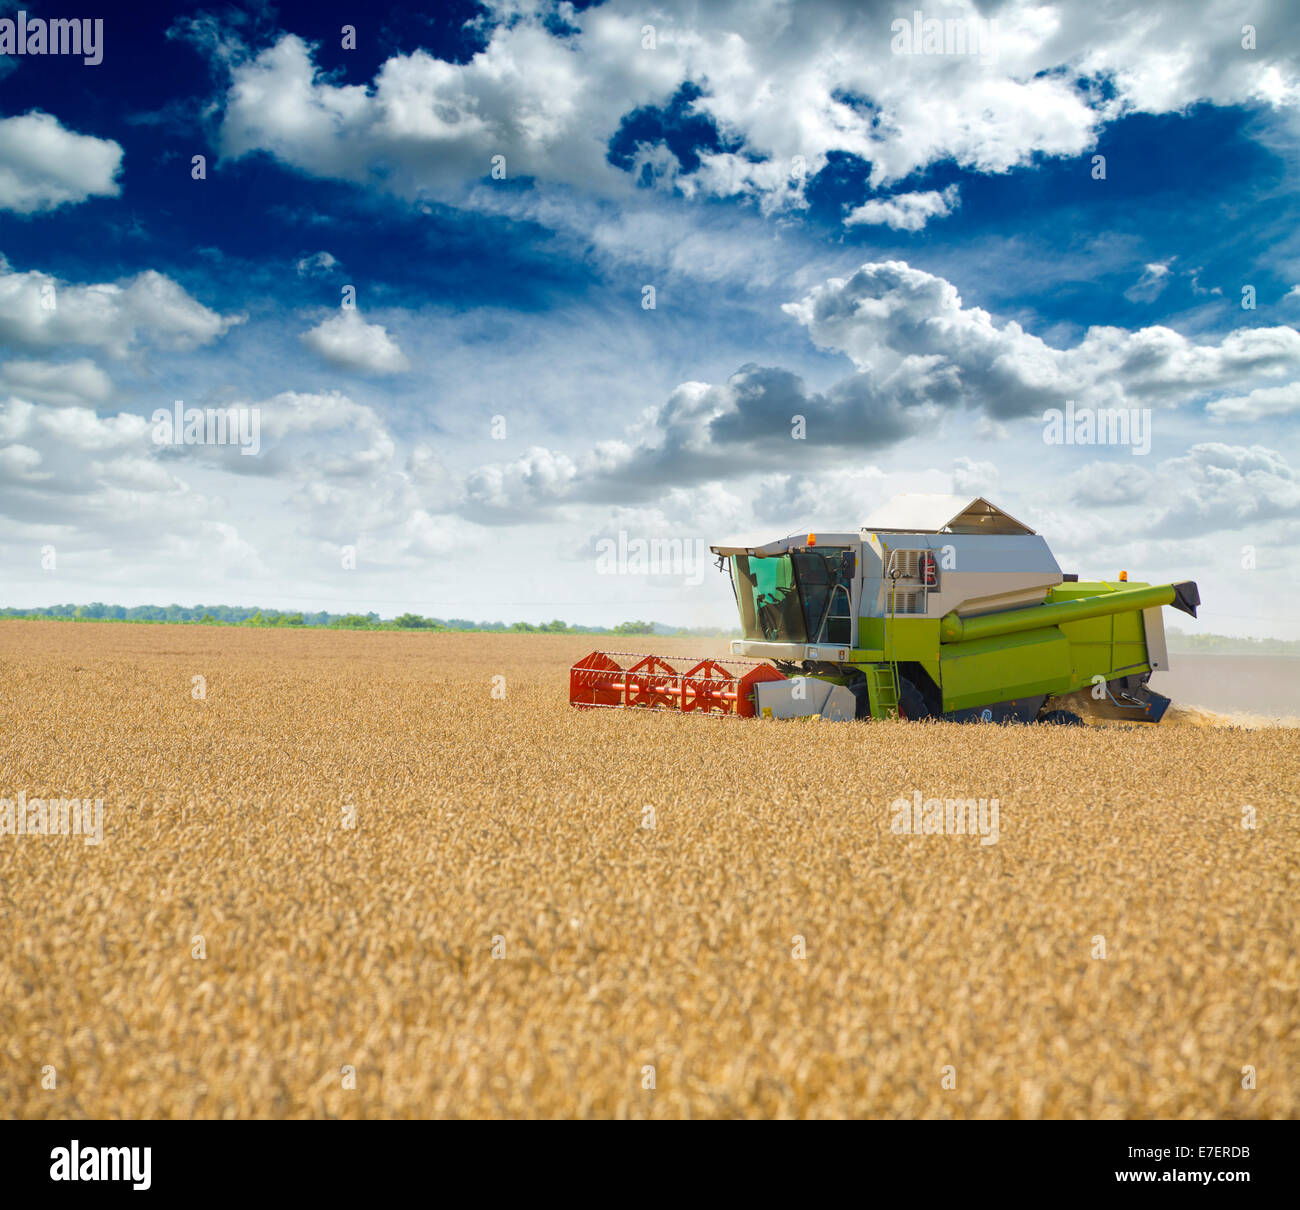 Combine harvester in action on wheat field Stock Photo